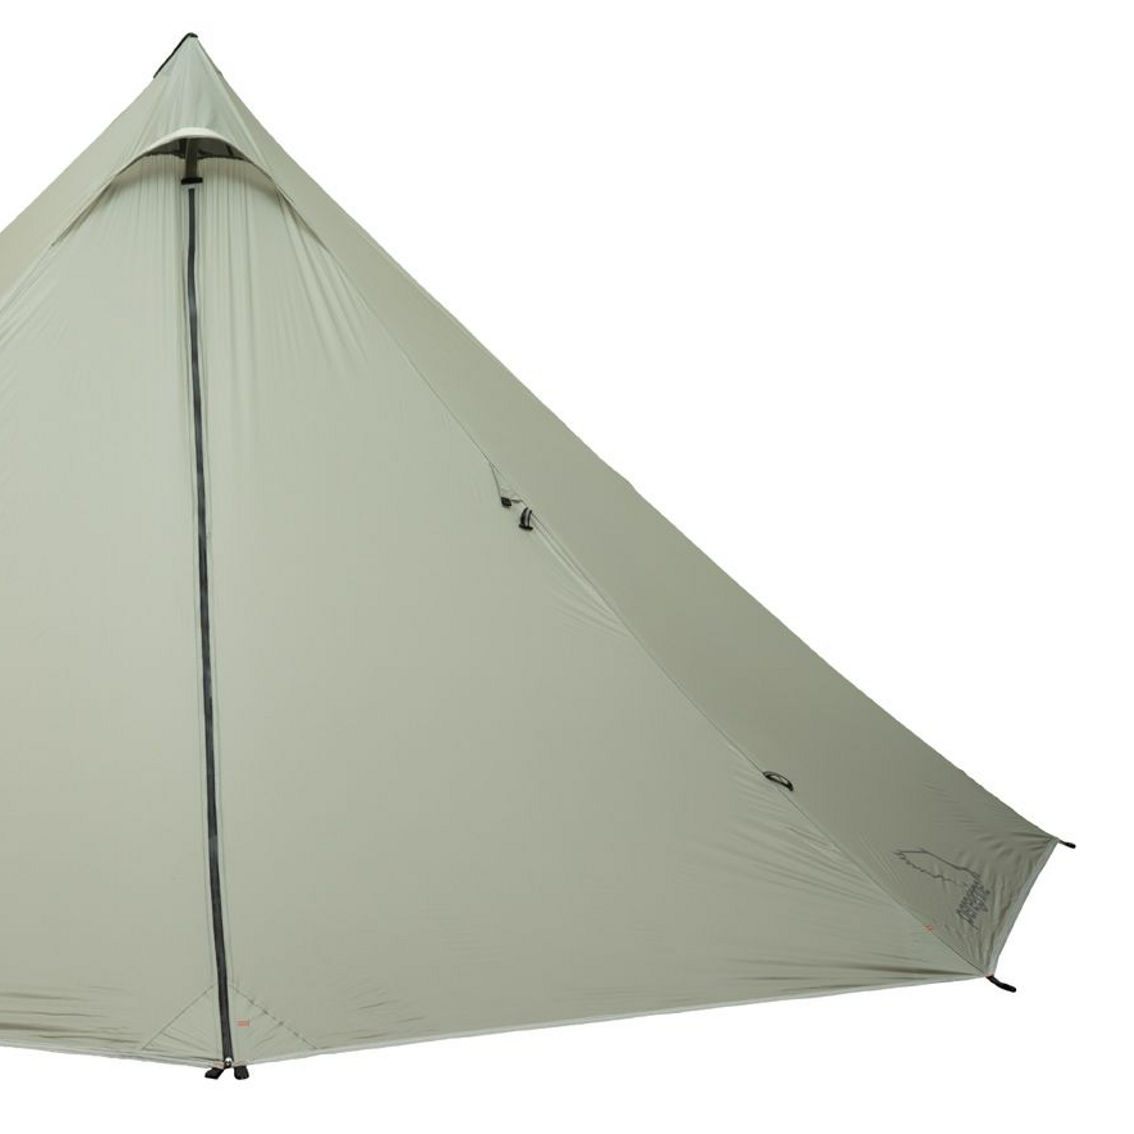 BOREAL HT - 4 PERSON FLOORLESS HOT TENT WITH  POLE WITH STOVE JACK - GREEN - Image 2 of 2